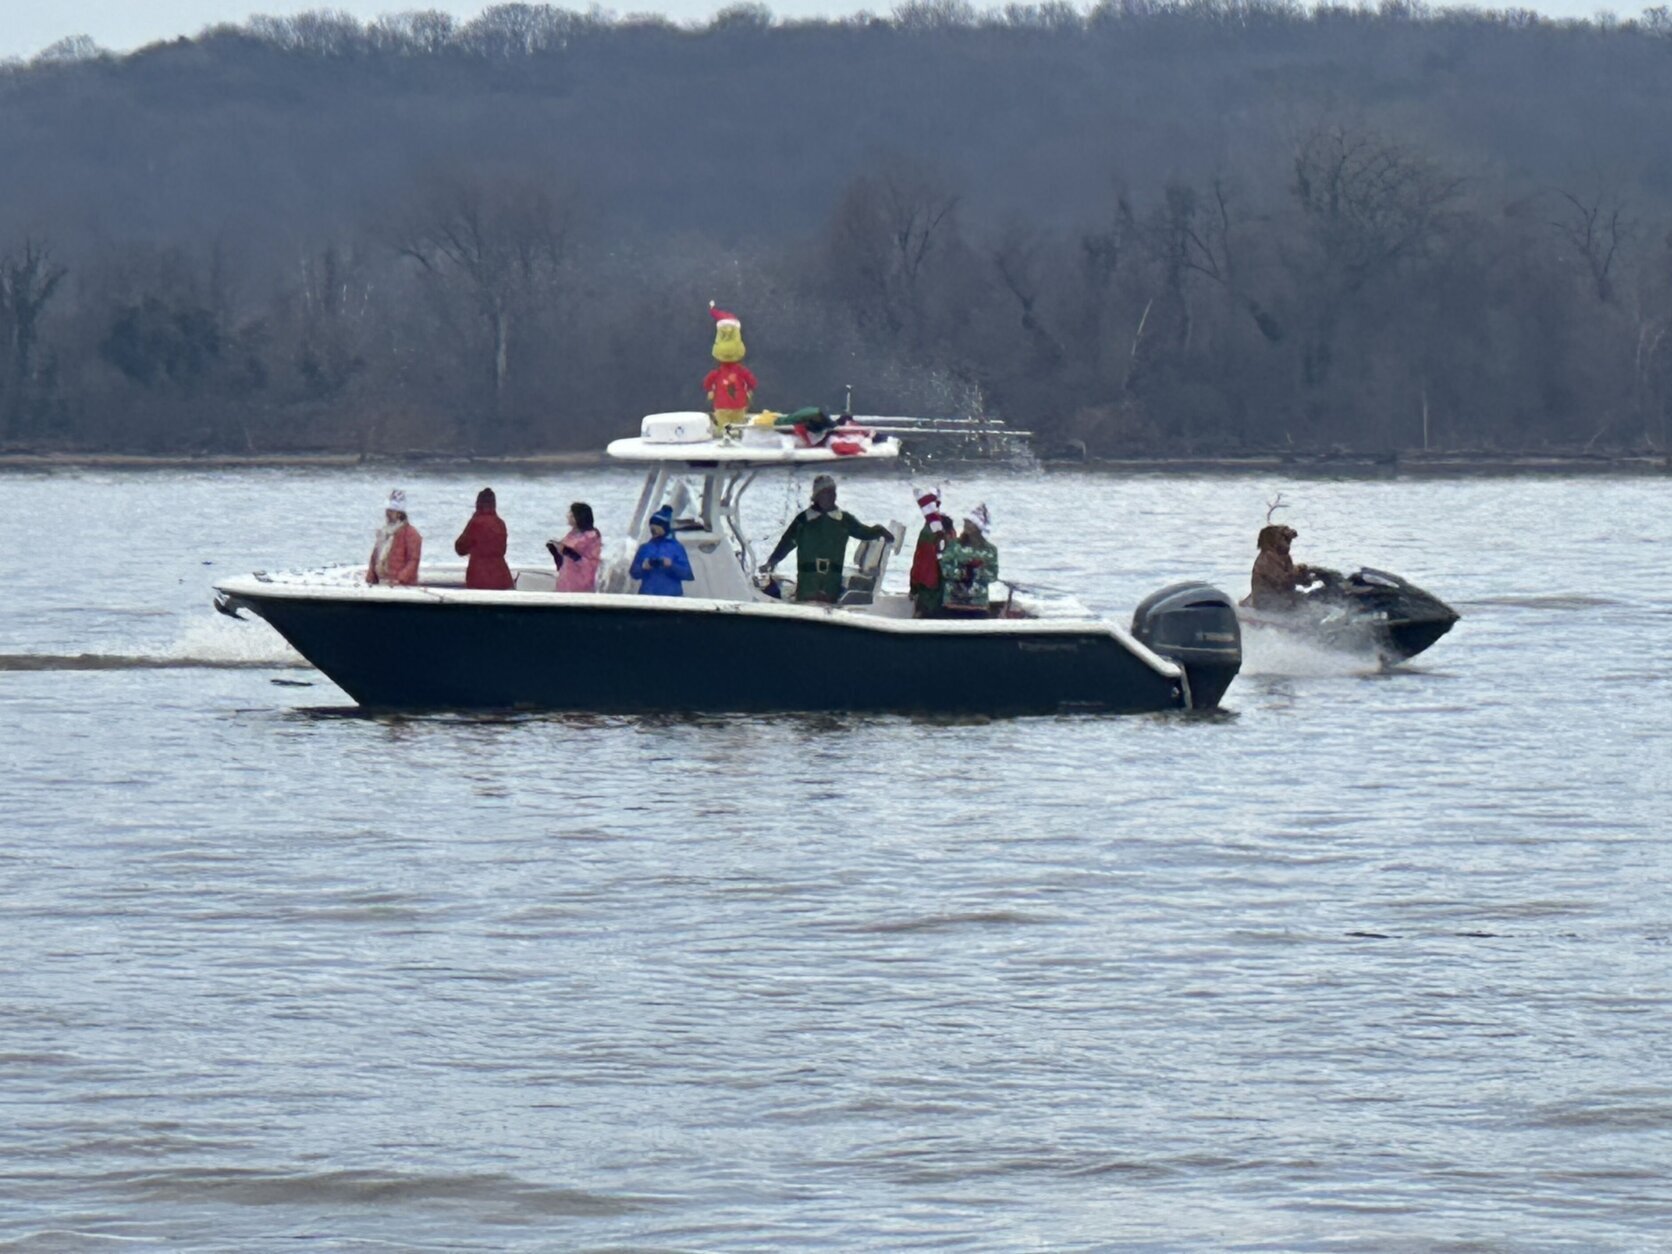 Santa on a boat with friends